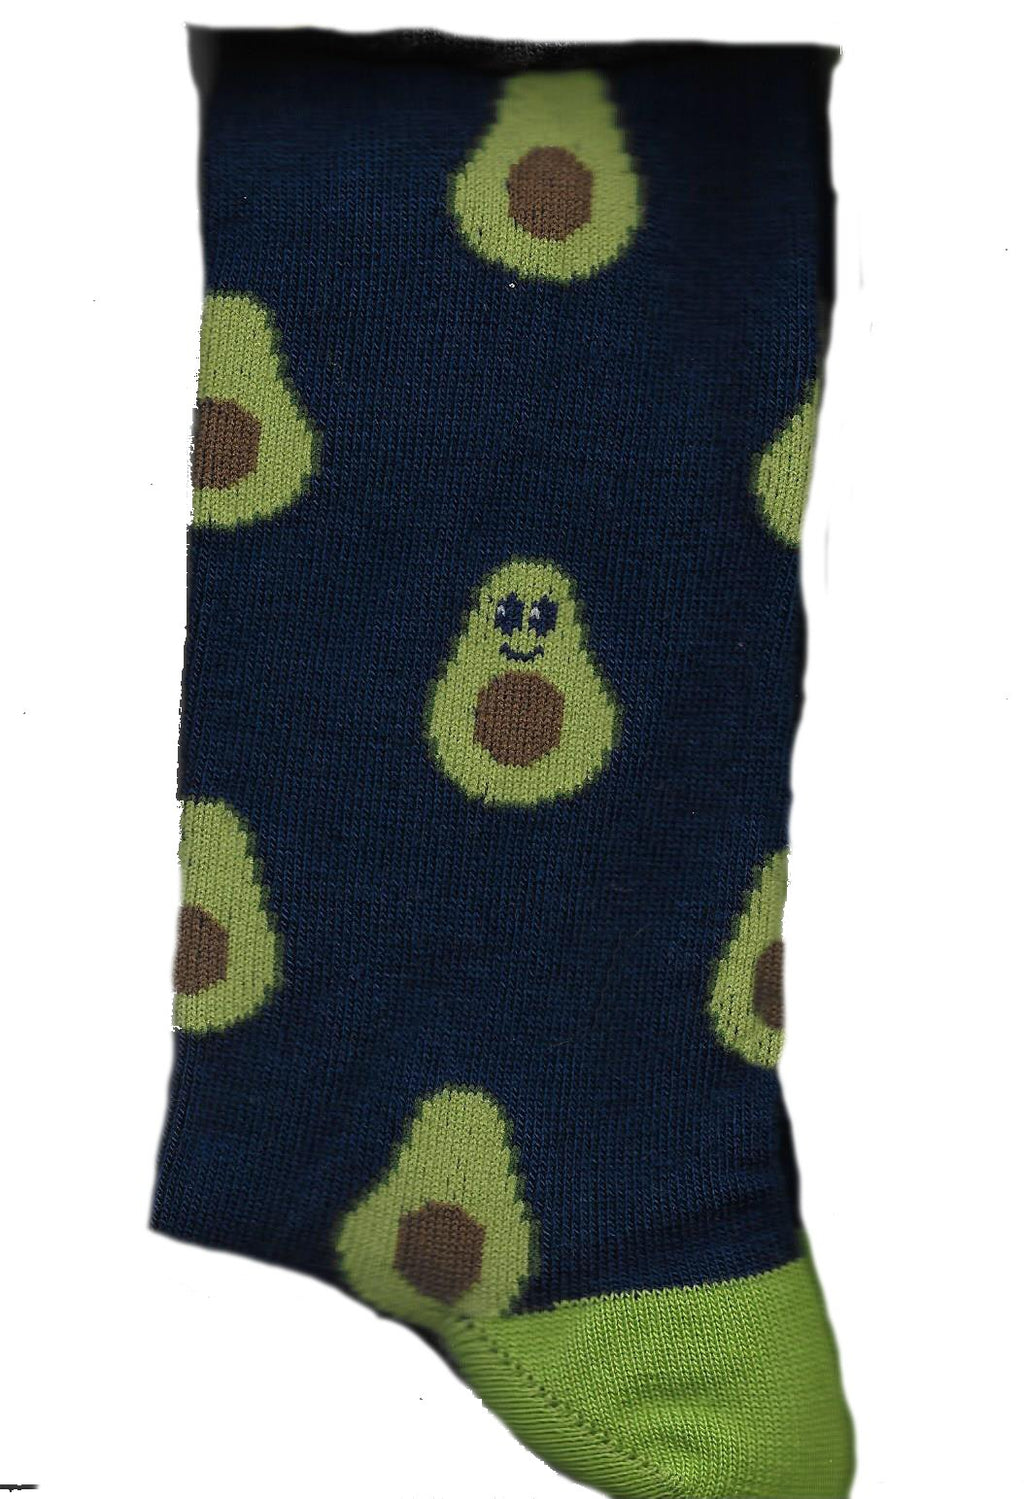 Royal Blue Background Sock with Avocado Cuffs, Heels and Toes. Avocados are same color with Dark Chocolat Pits. One Avocado has a Face with Eyes and Smile.